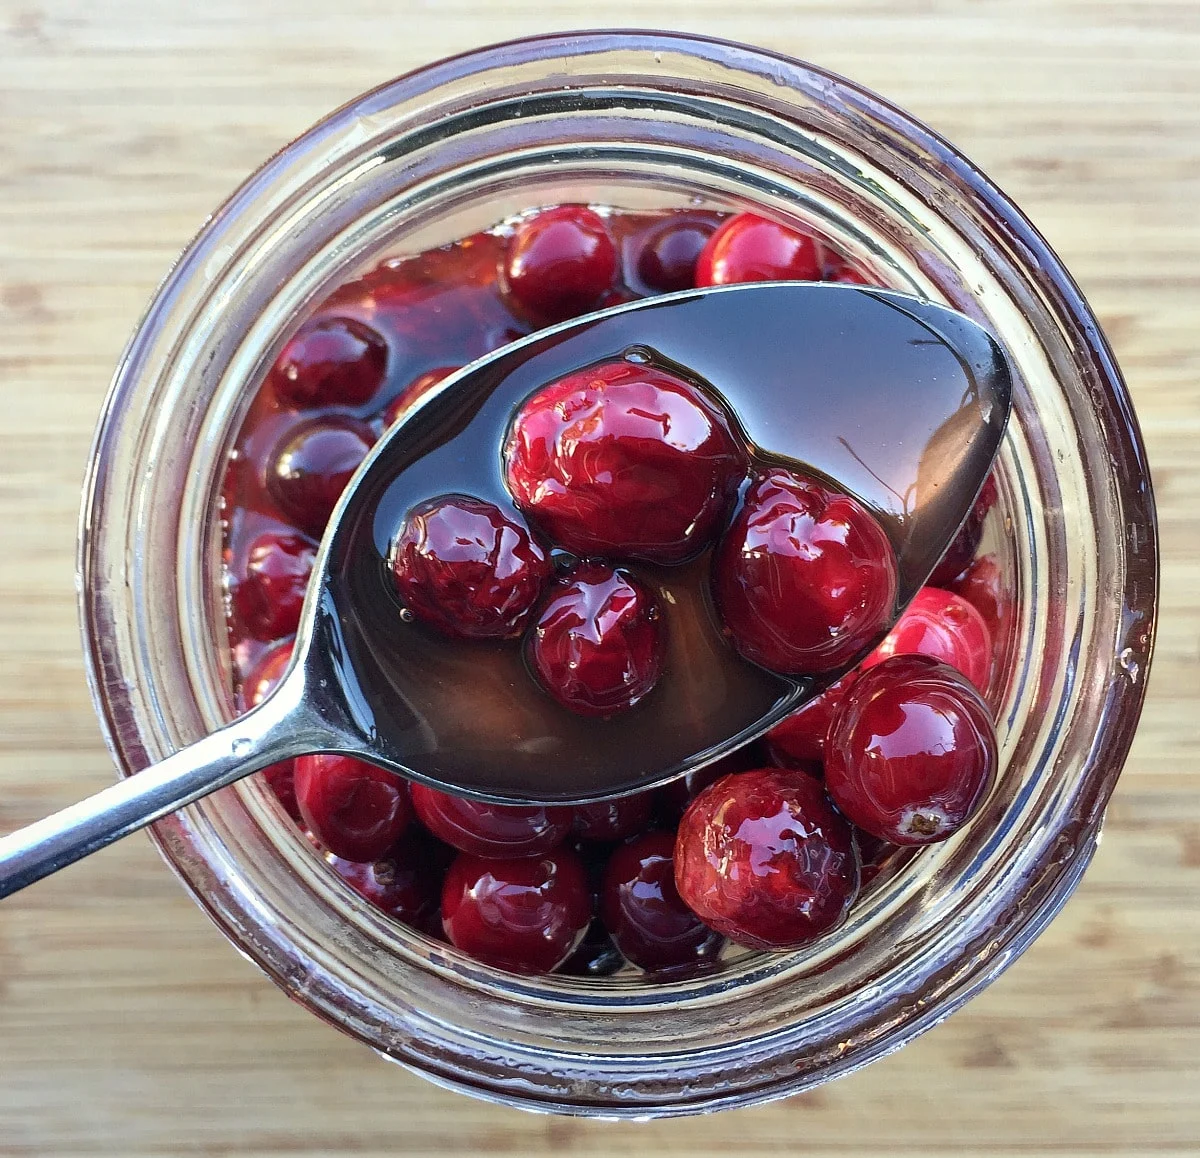 Cooking with Cranberries - Fermented Honey Cranberries